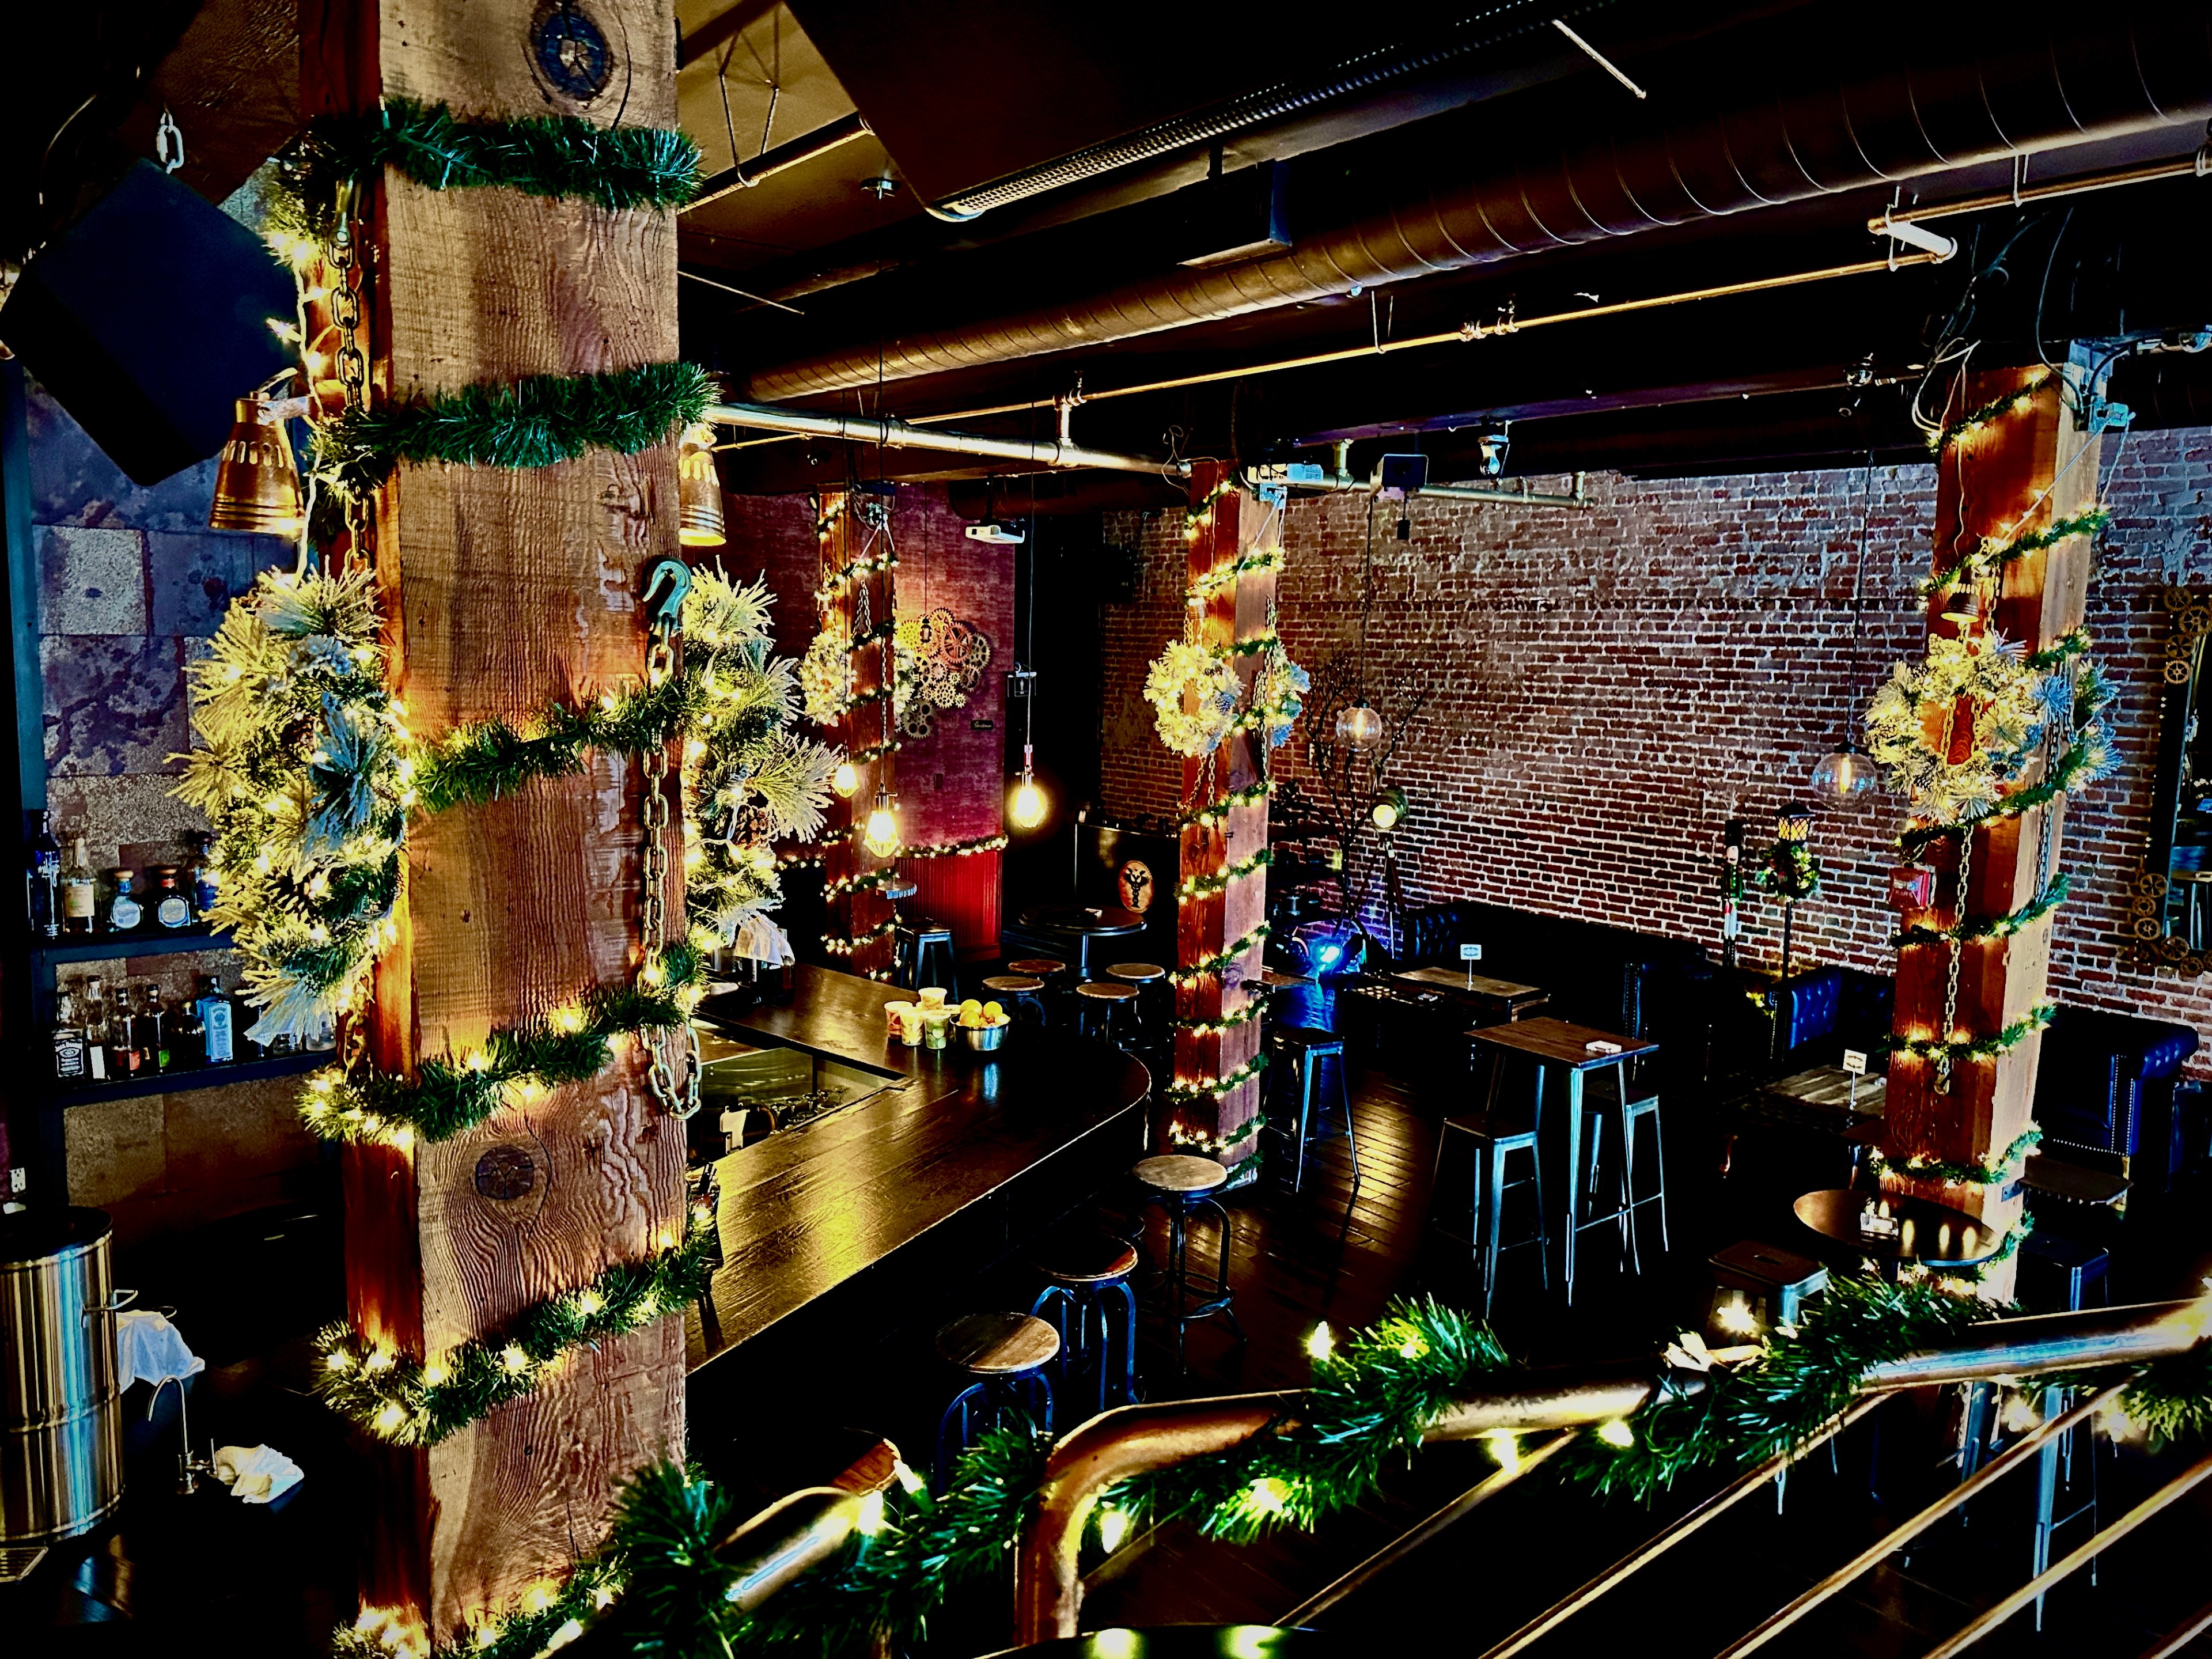 Garlands and lights are wrapped around wooden pillars in an industrial-style bar with exposed brick walls. 